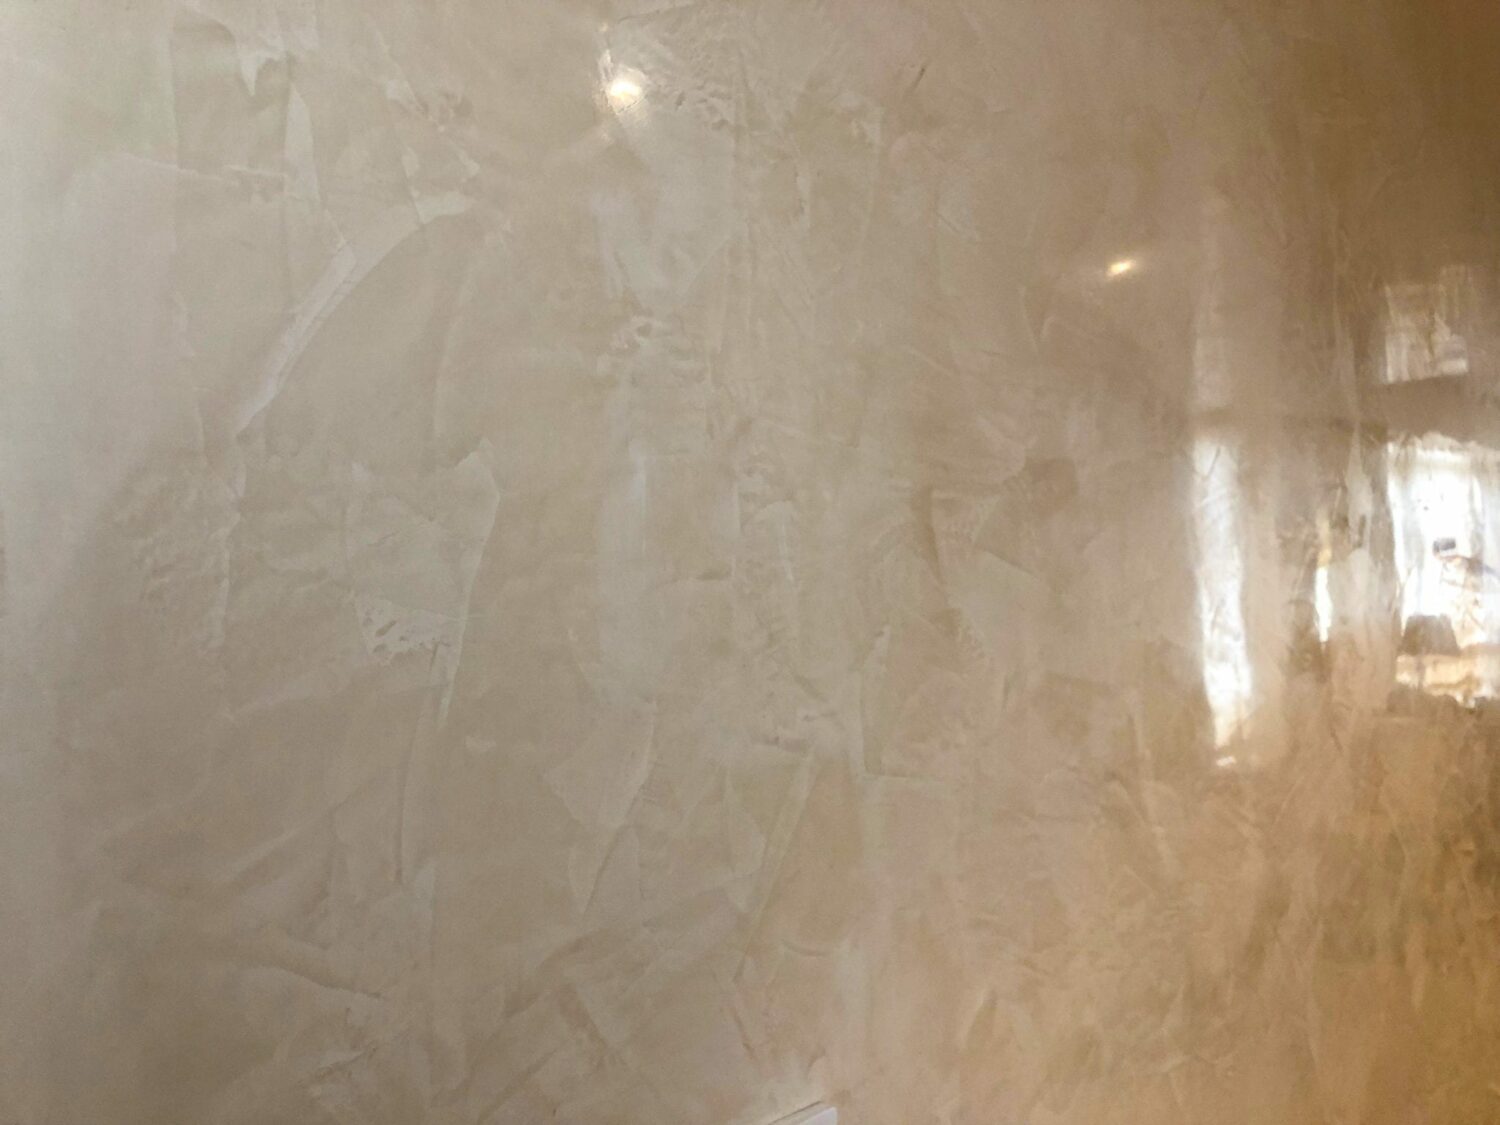 Decorfin- Decorative Wall Finishes & Venetian Plaster - Did you know that Venetian  Plaster is actually eco friendly?! Traditional Venetian plaster is made of  lime and marble dust which is 100% natural.